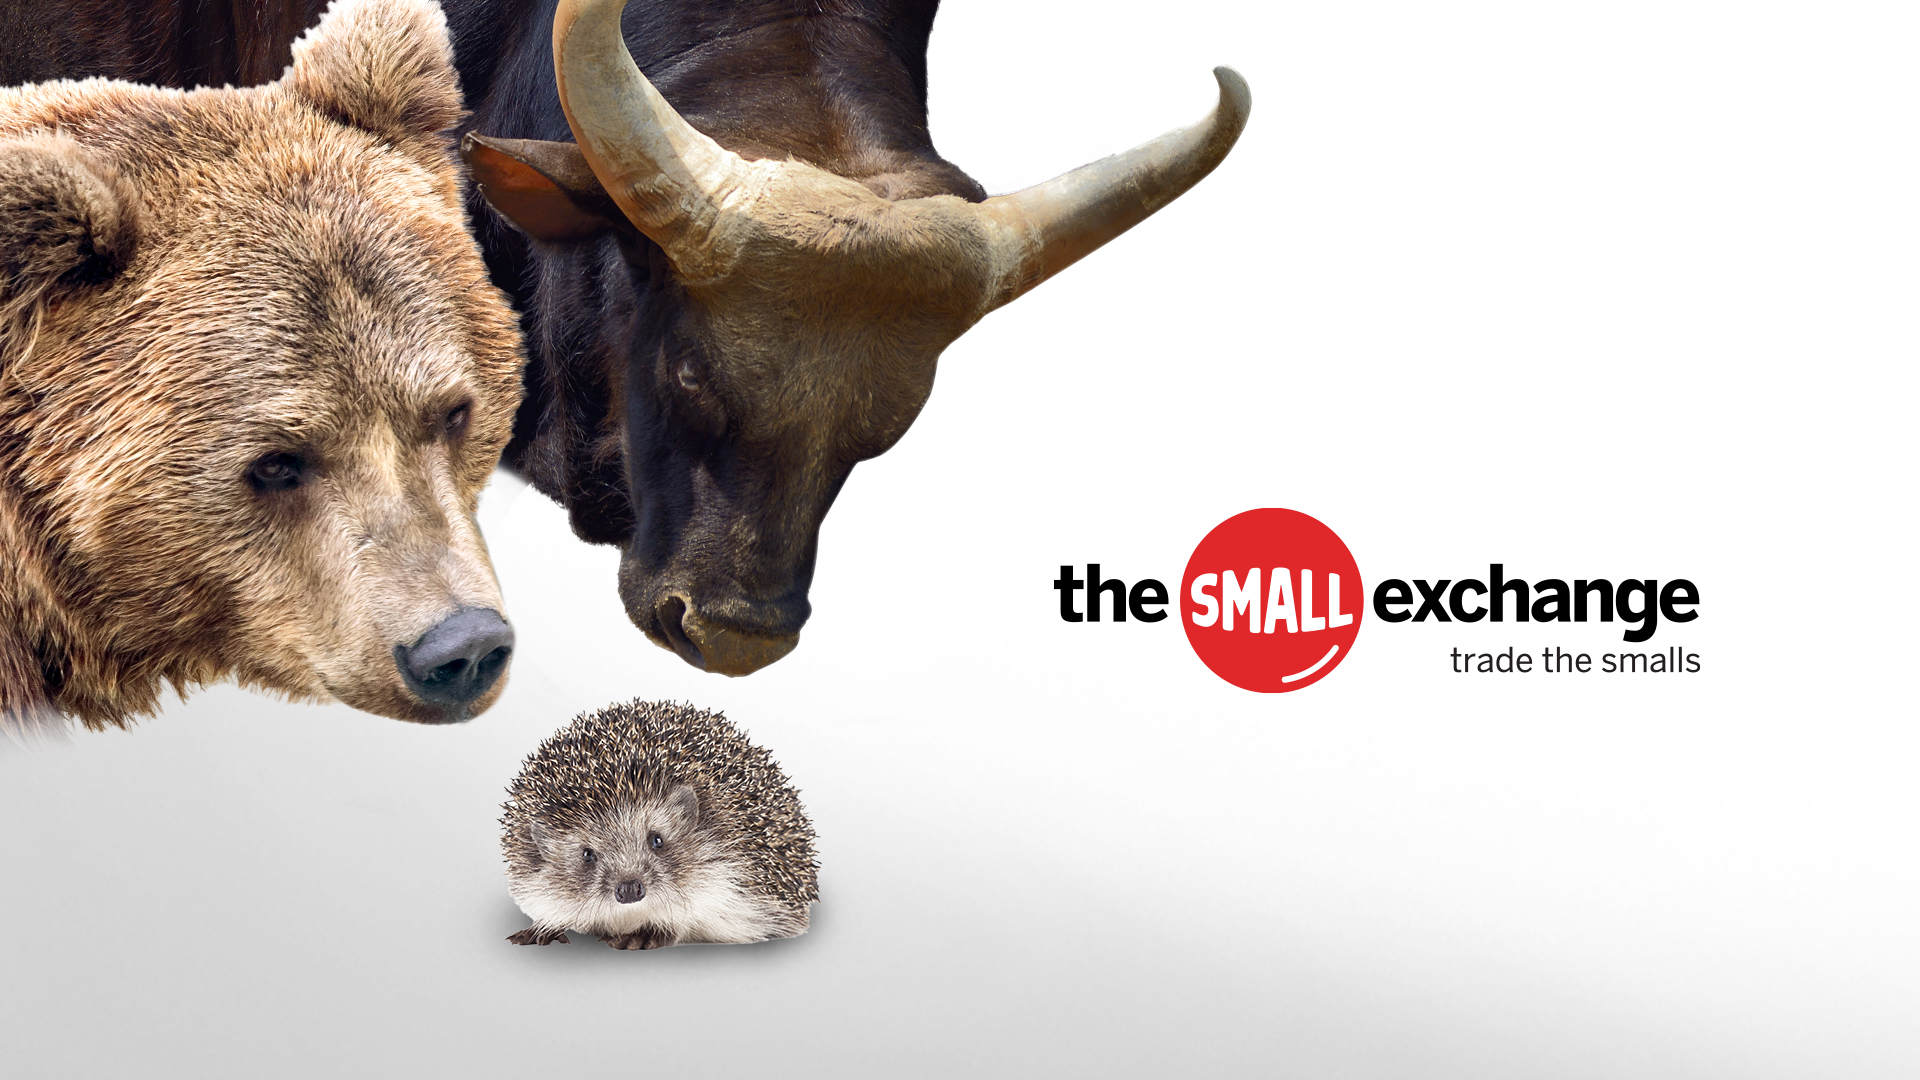 Photo-illustration on white background: at left, a hedgehog looks at the viewer as a bear and a bull look down at it. At right, the logo of The Small Exchange with tagline: "trade the smalls"